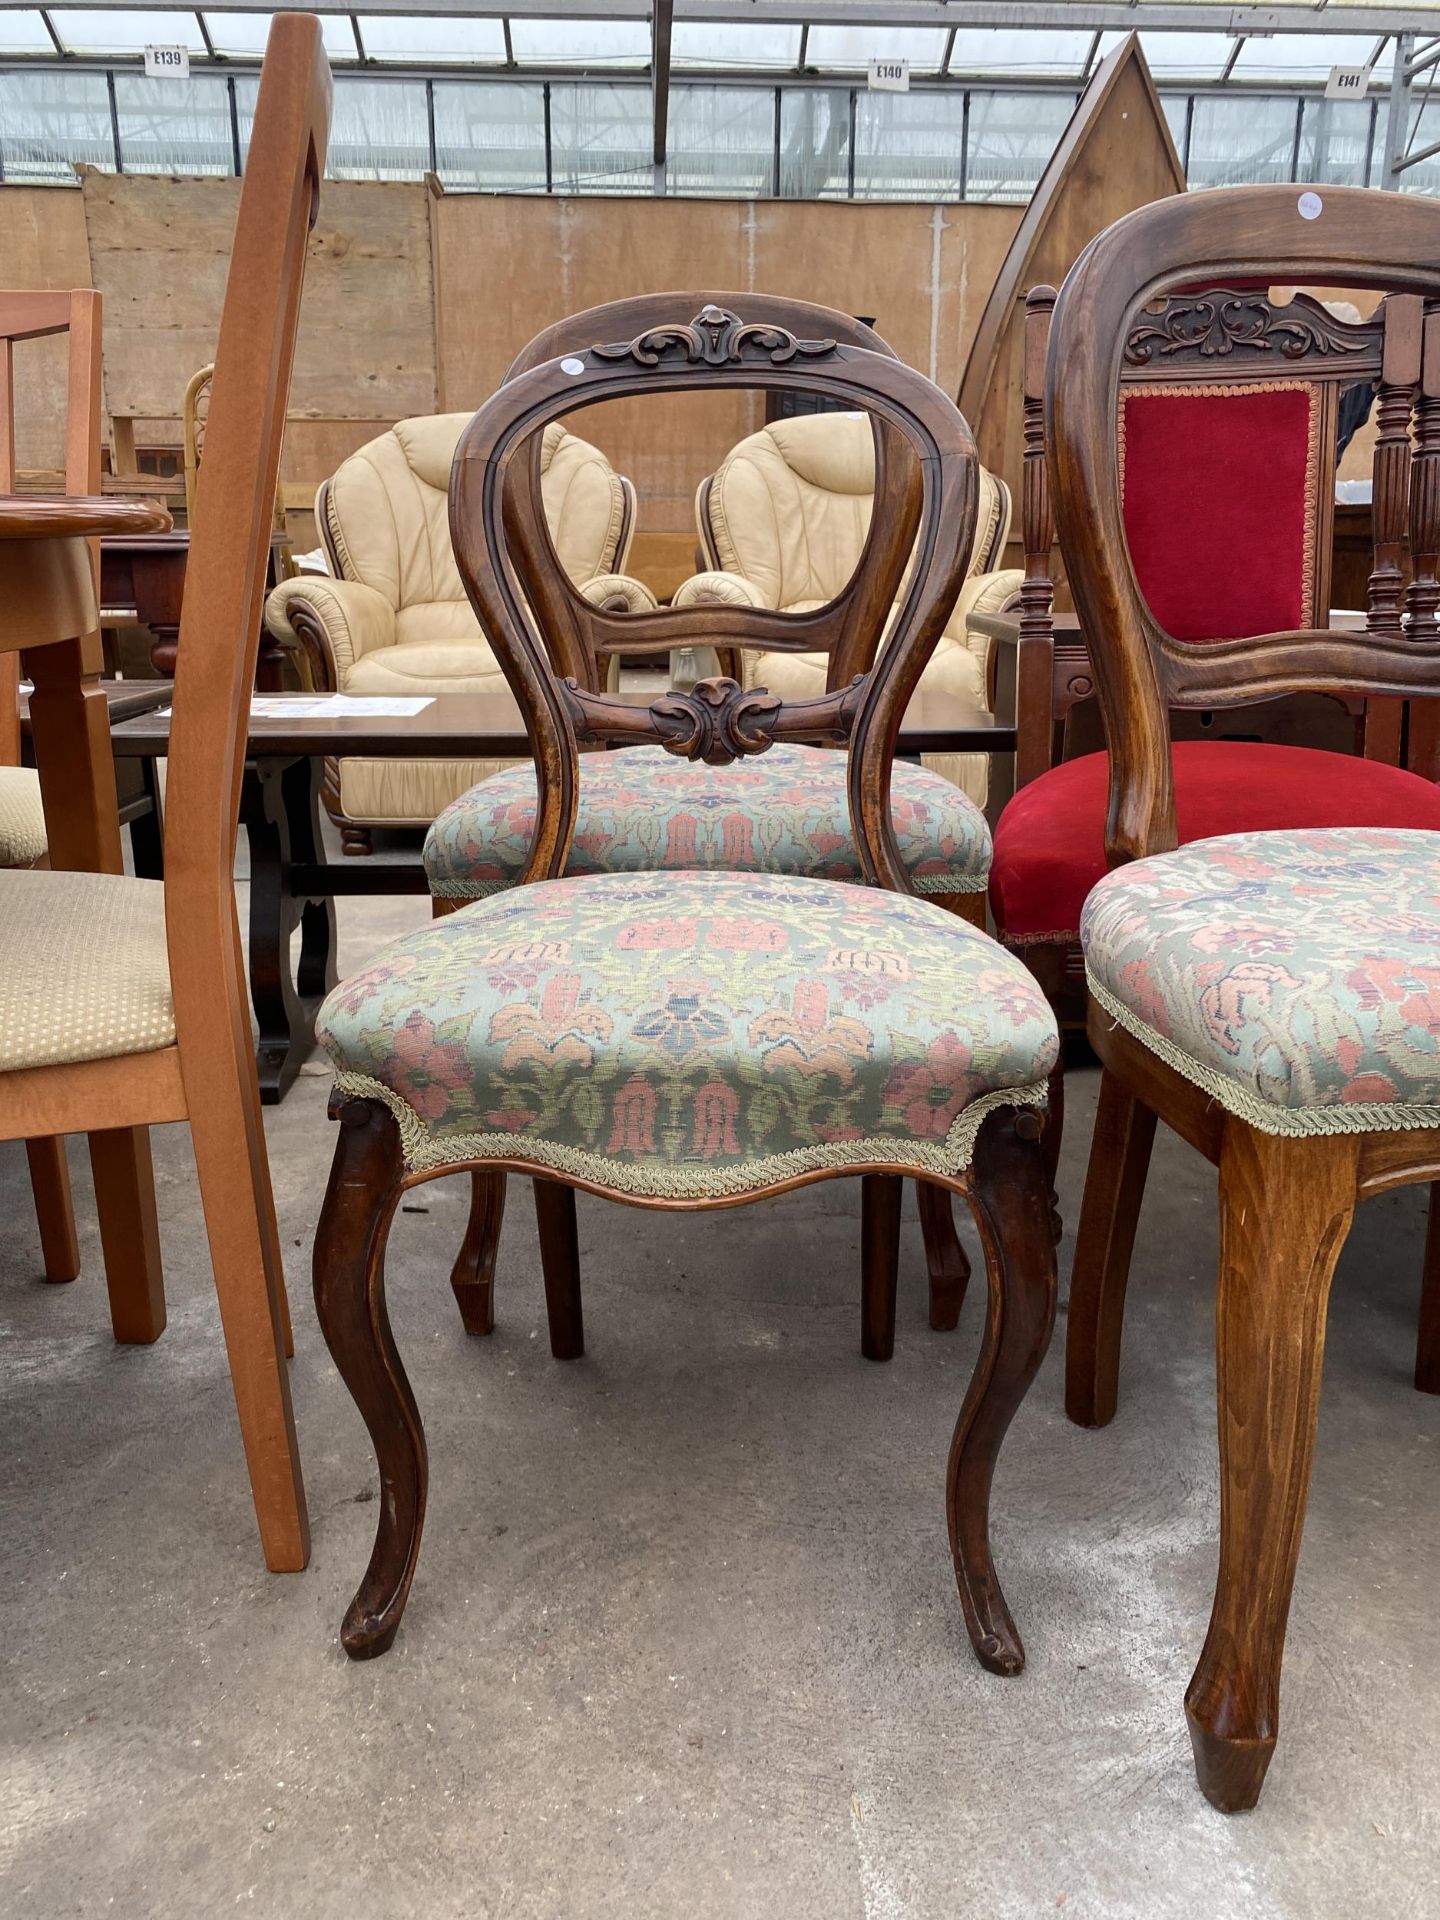 THREE VICTORIAN MAHOGANY DINING CHAIRS WITH CARVED BACK RAILS AND THREE BALLOON BACK CHAIRS - Image 4 of 4